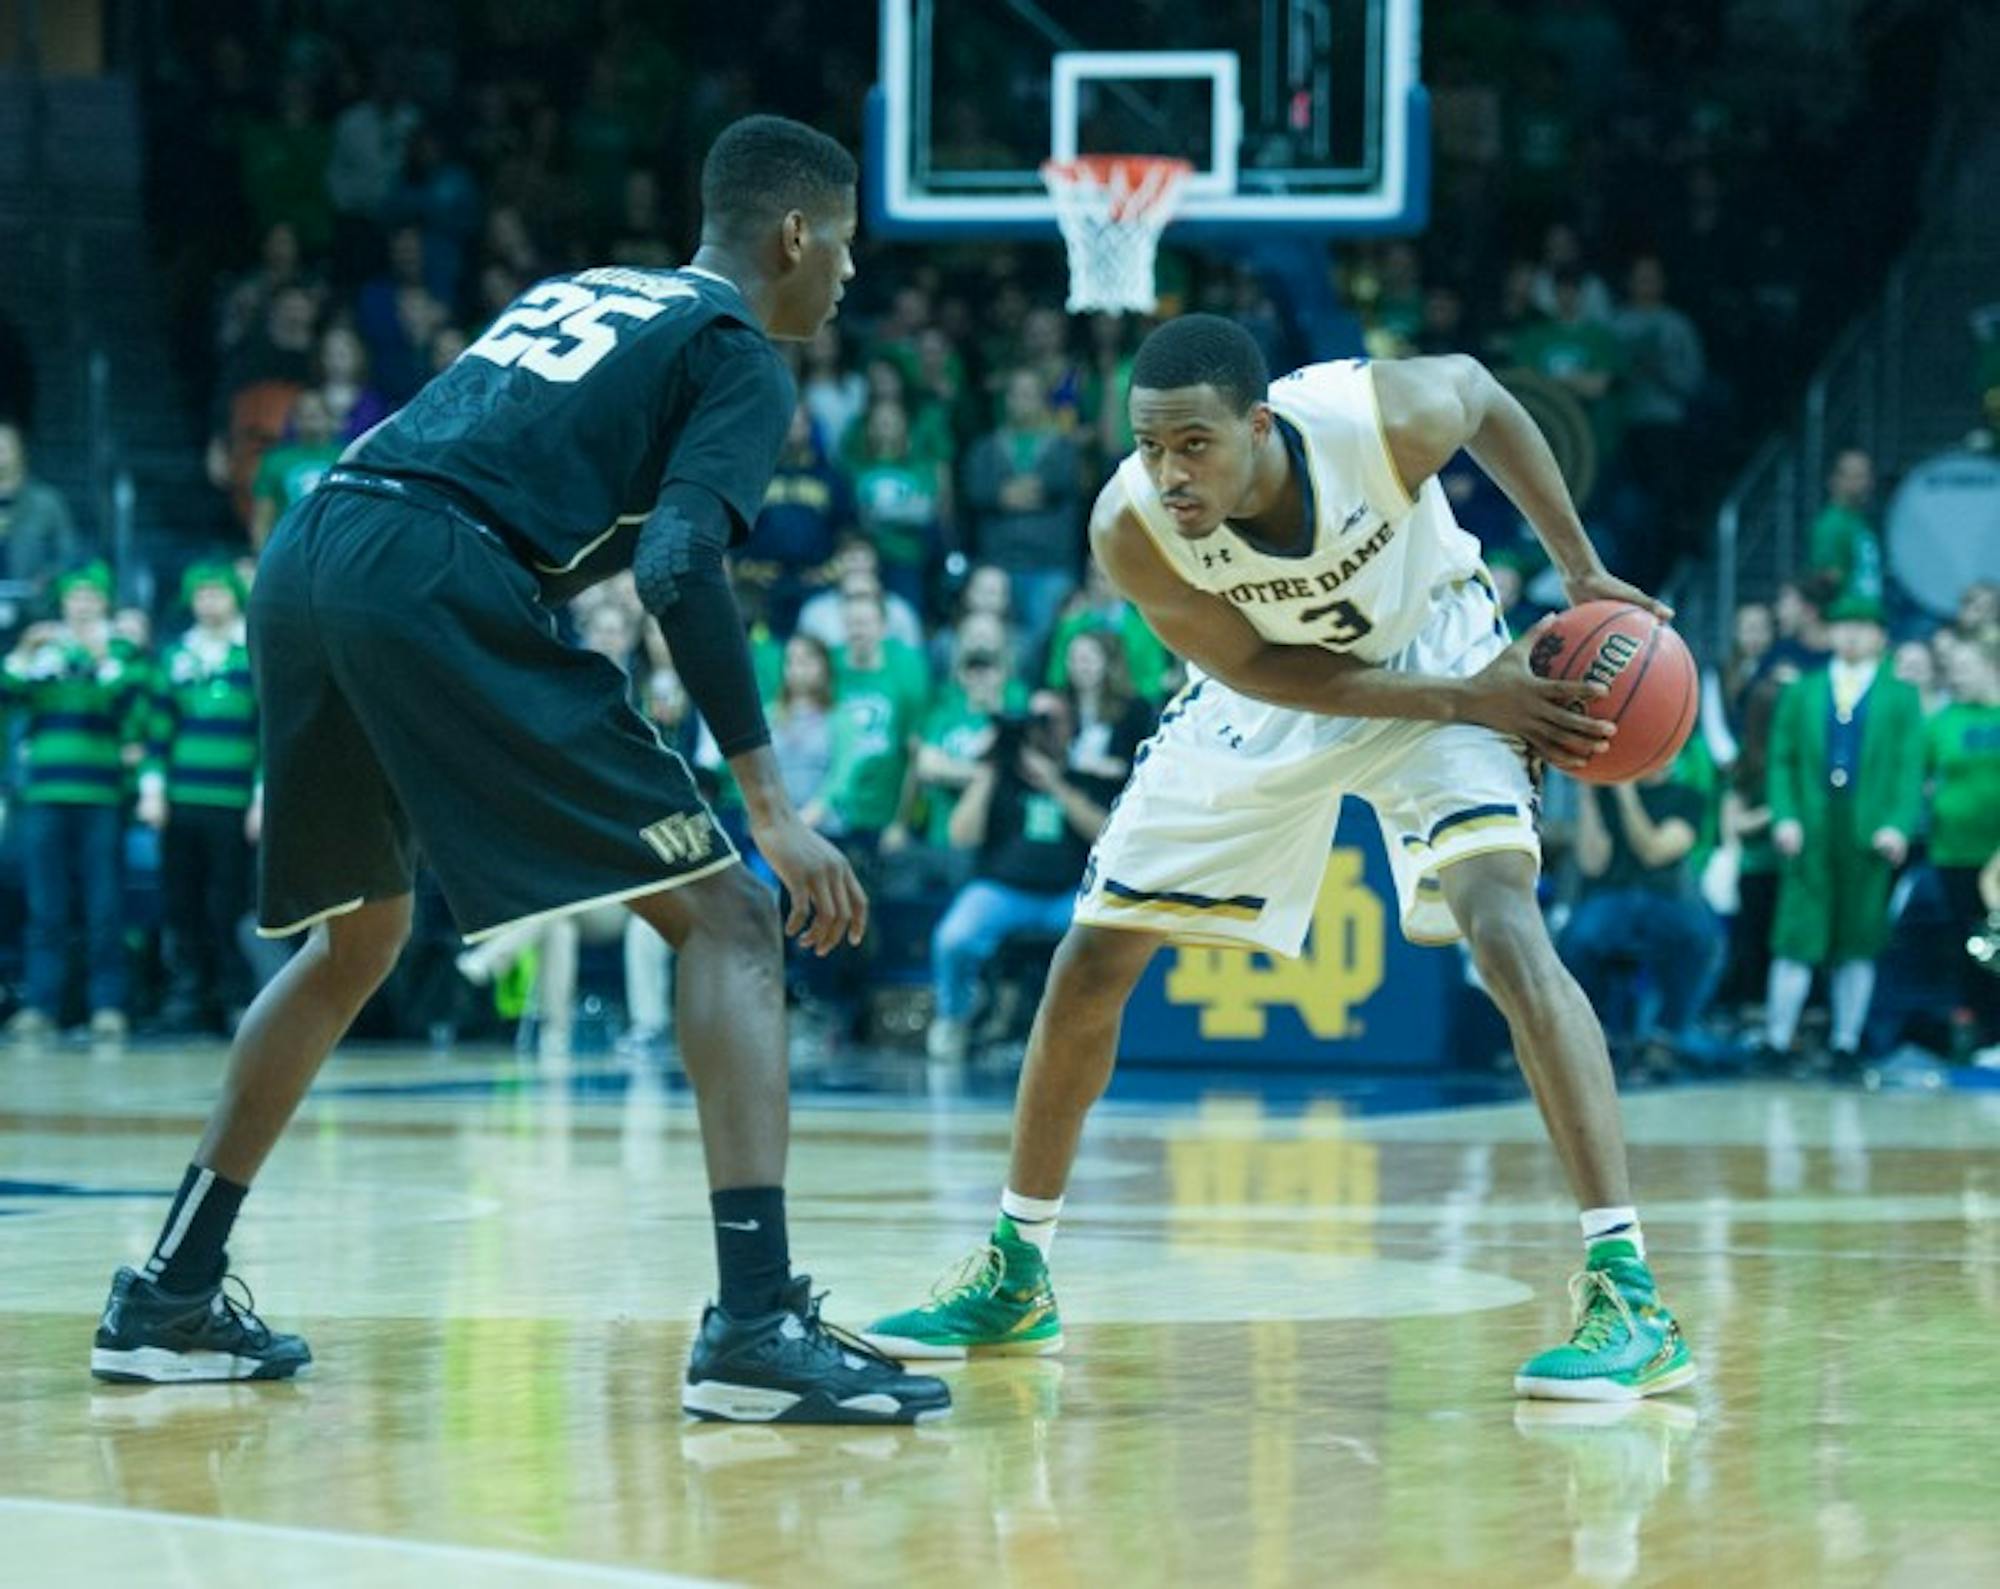 Irish sophomore guard V.J Beachem analyzes the defense during Notre Dame’s 88-75 win over Wake Forest on Feb. 17 at Purcell Pavilion.